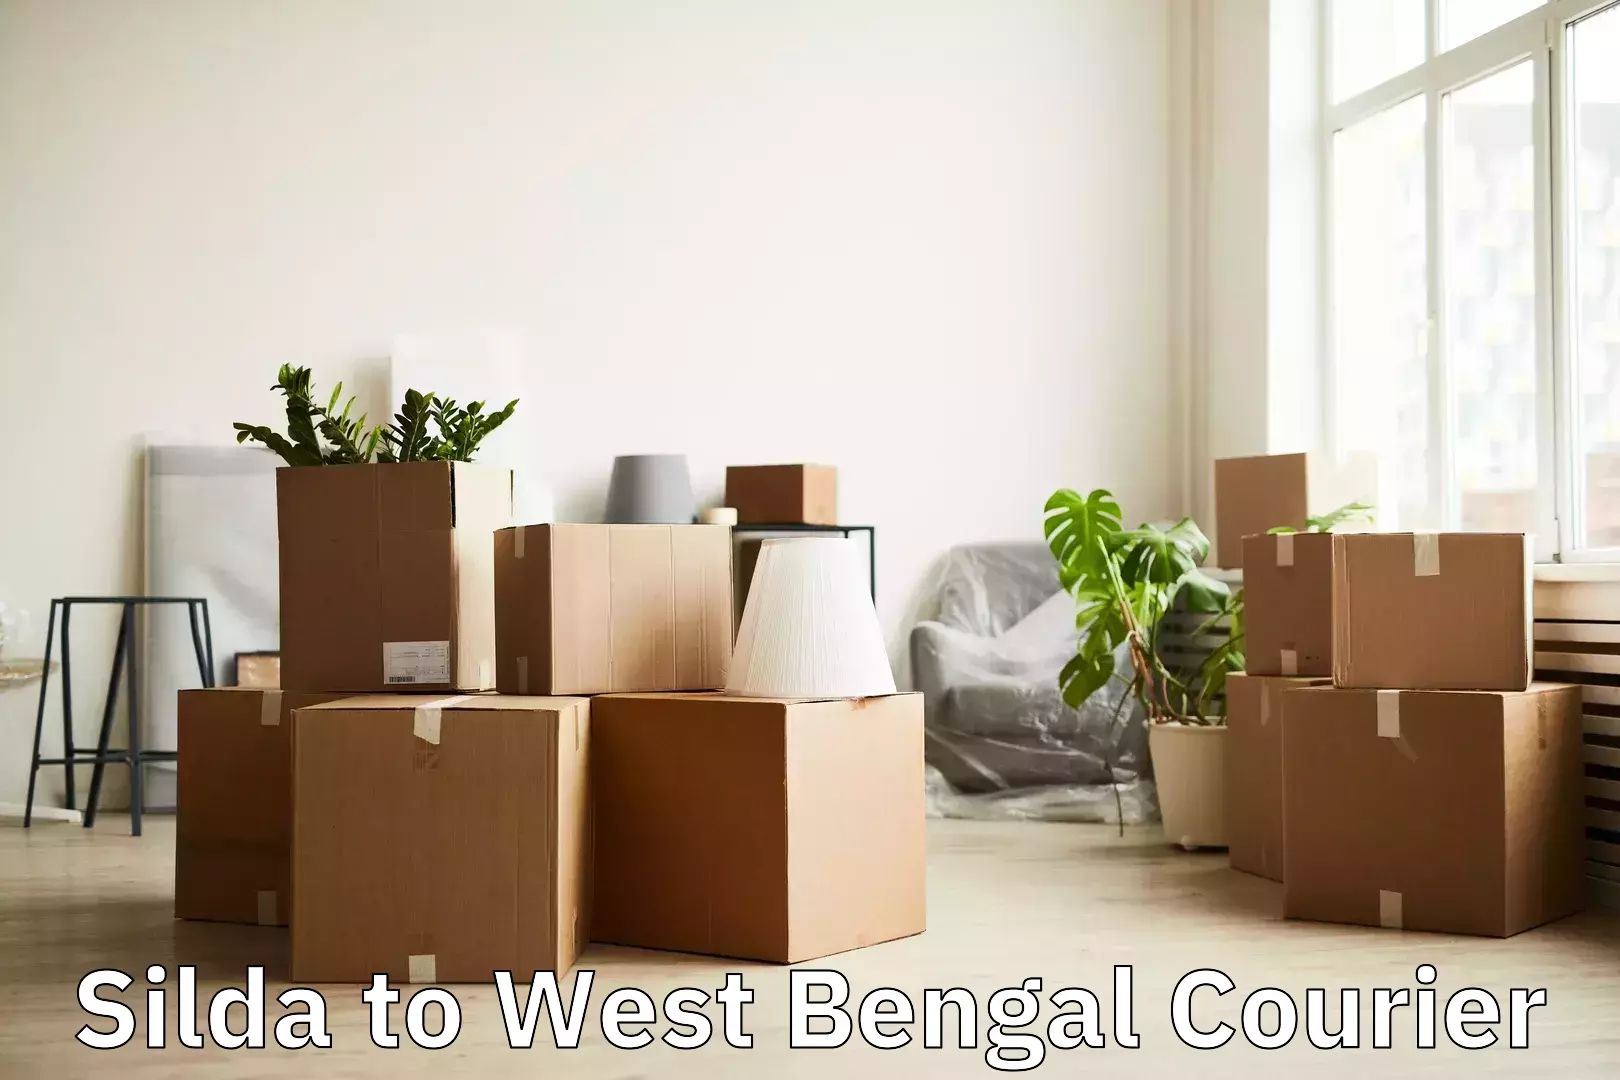 Comprehensive baggage service Silda to West Bengal